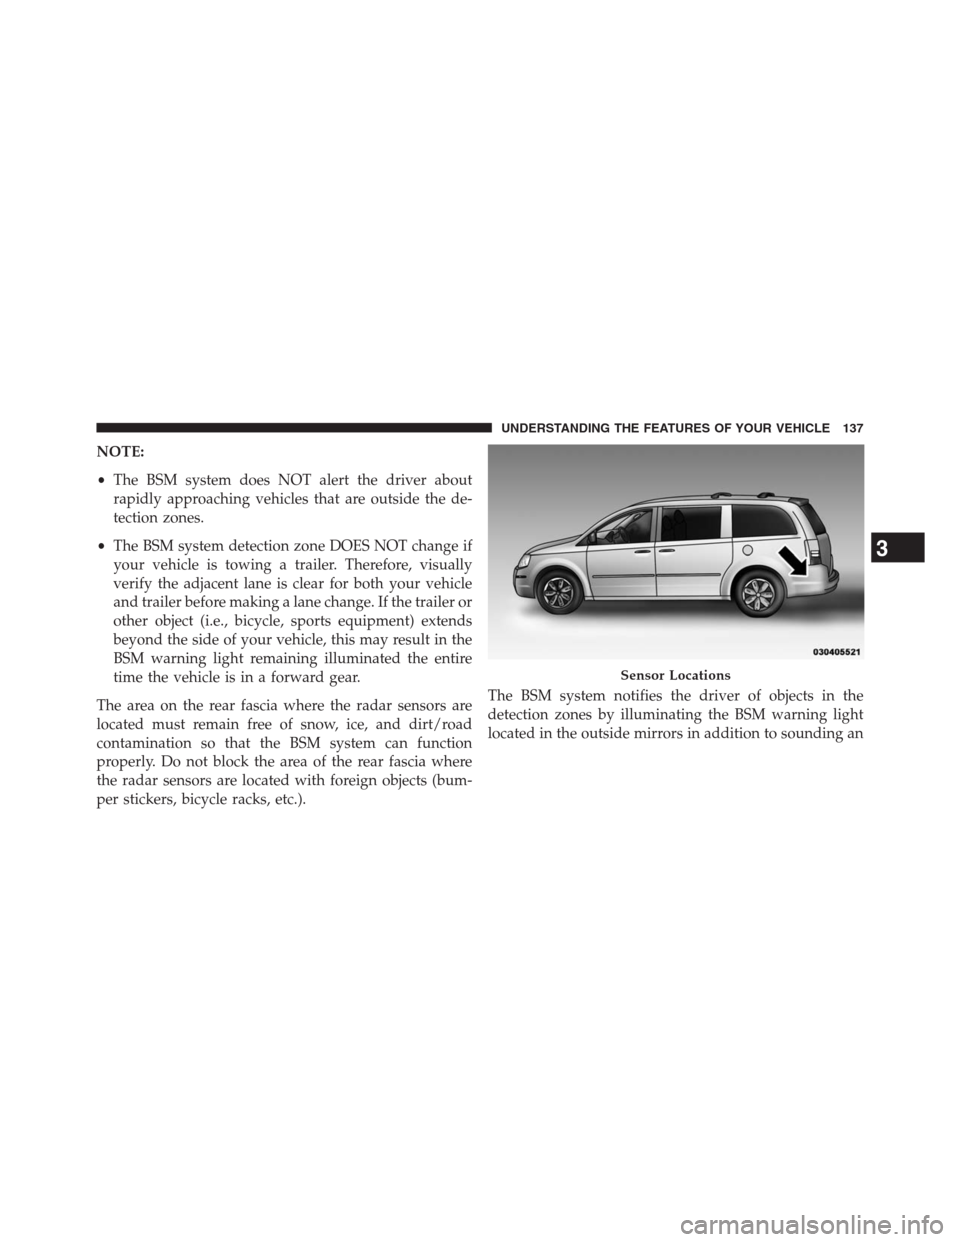 DODGE GRAND CARAVAN 2013 5.G Owners Manual NOTE:
•The BSM system does NOT alert the driver about
rapidly approaching vehicles that are outside the de-
tection zones.
•The BSM system detection zone DOES NOT change if
your vehicle is towing 